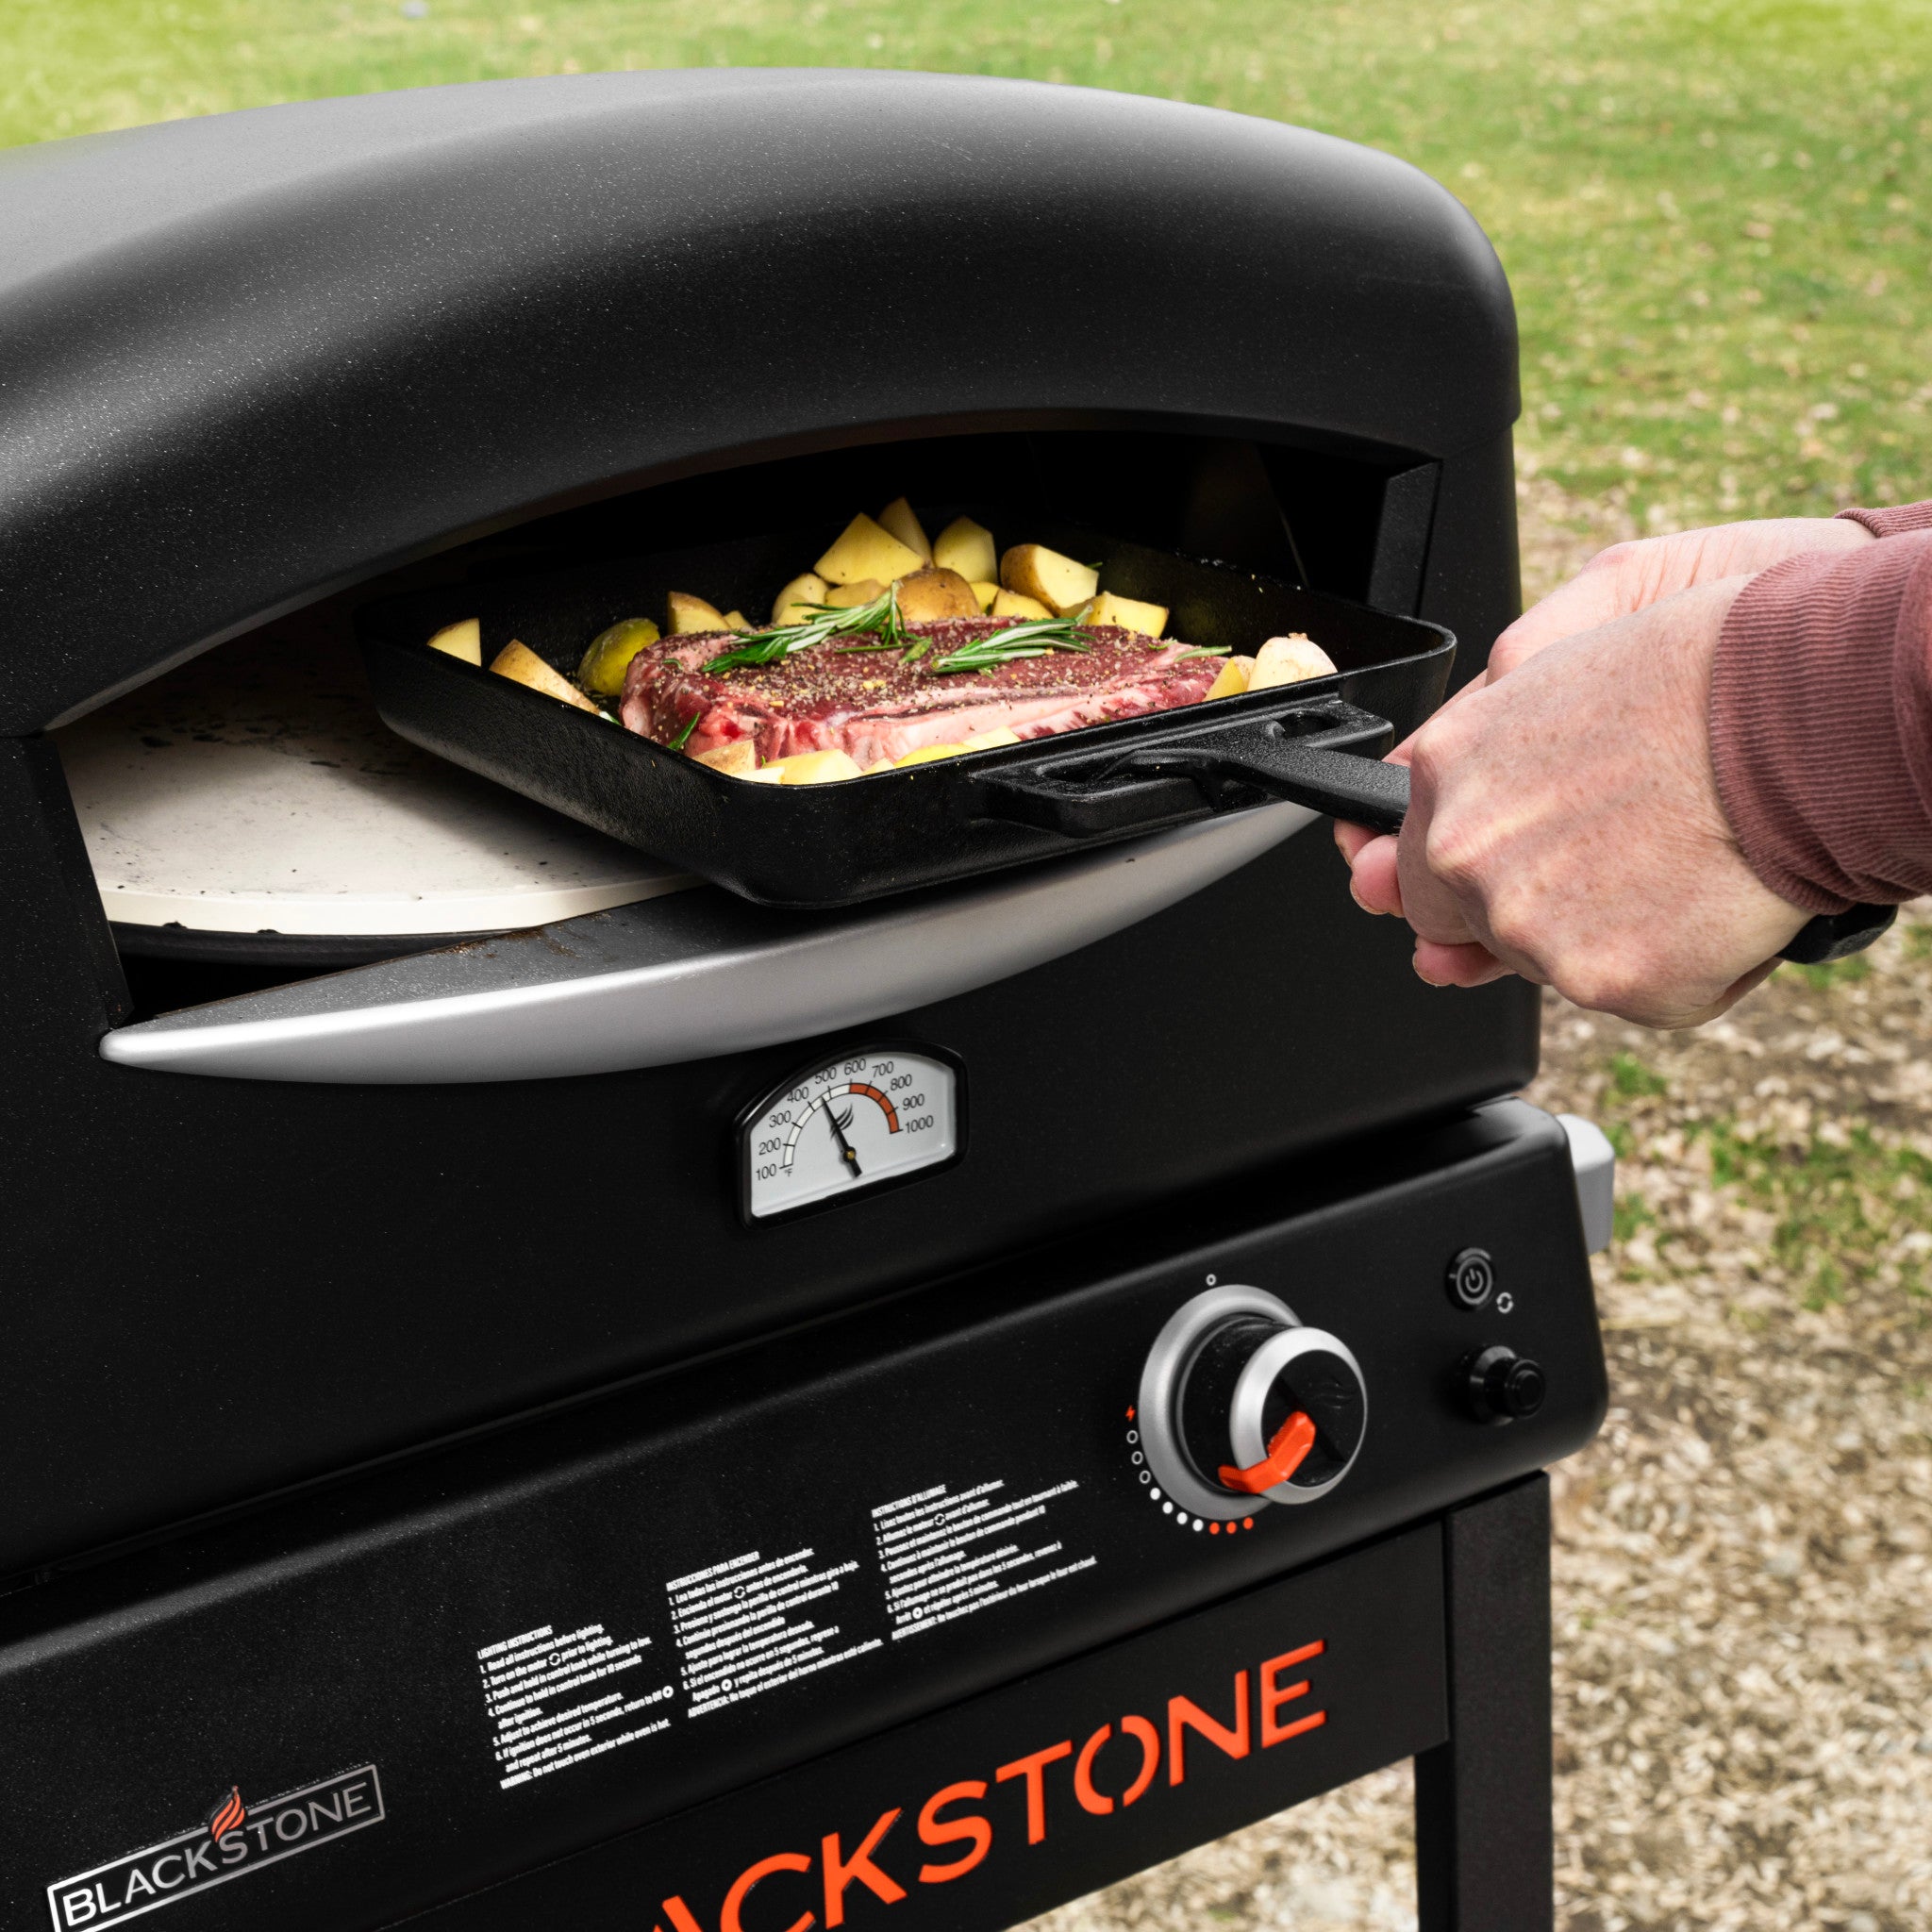 Blackstone 6825 Pizza Oven with Stand